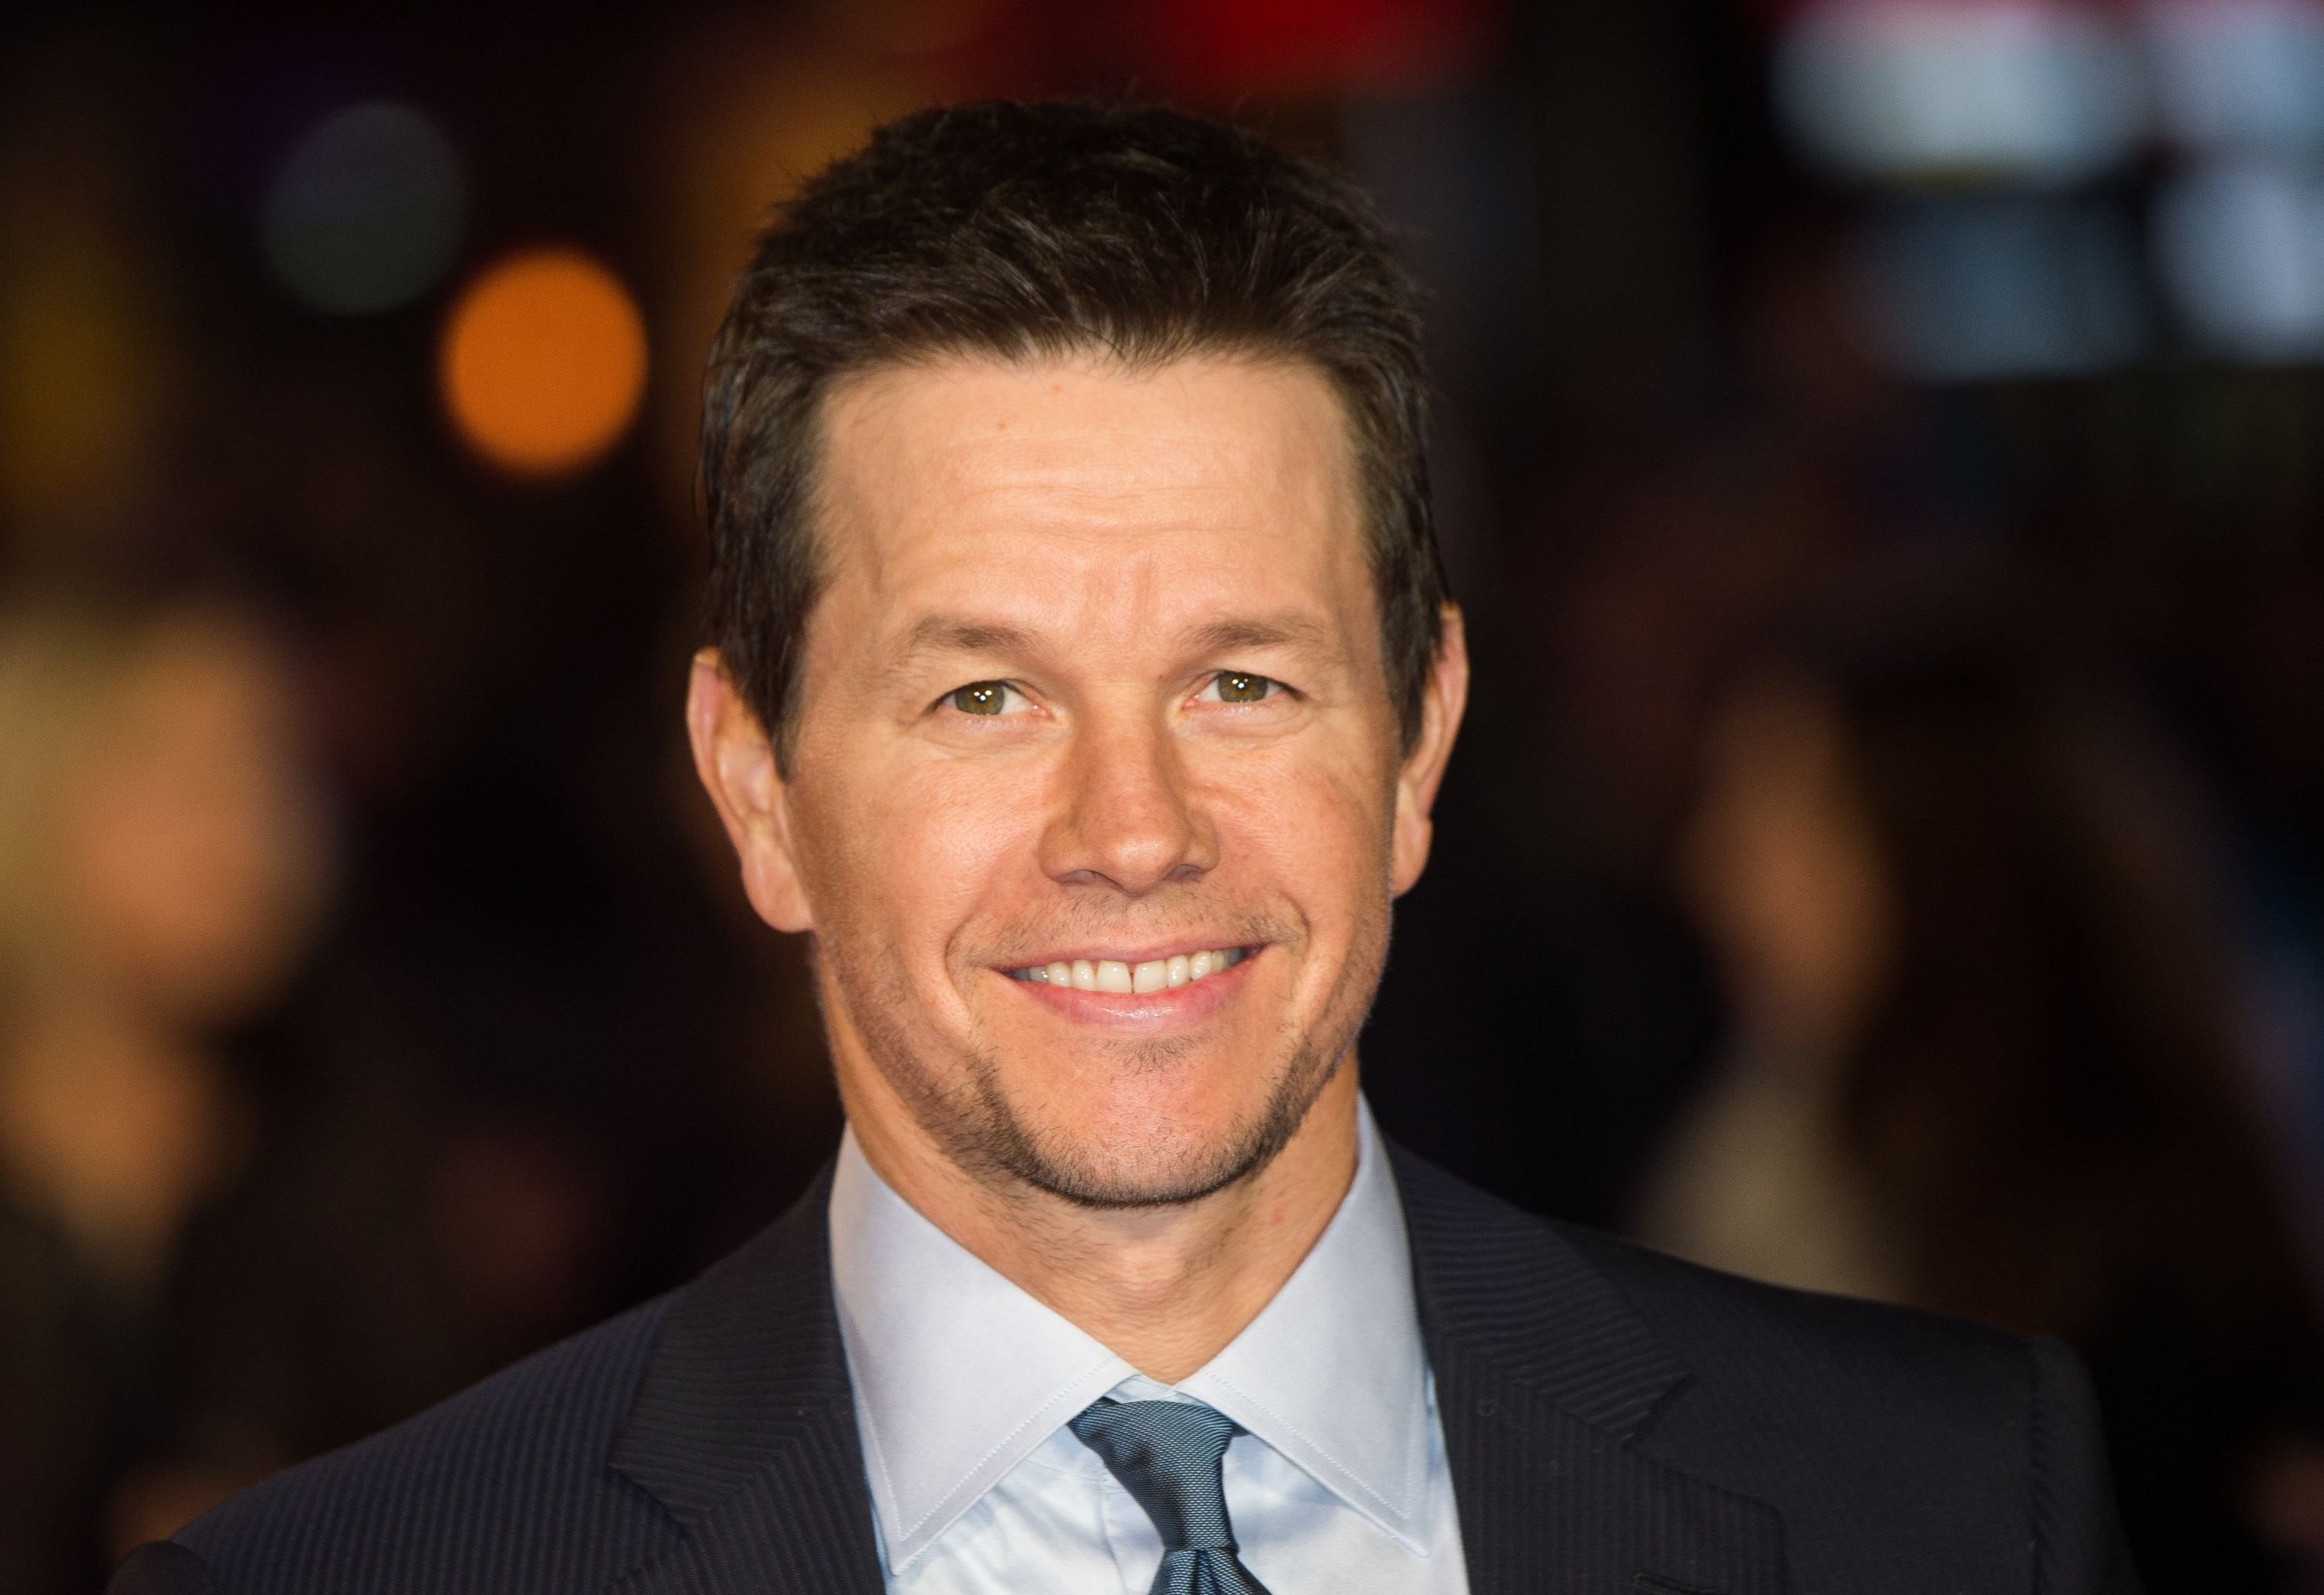 Mark Wahlberg at the UK premiere of "Daddy's Home" in 2015 in London, England | Source: Getty Images